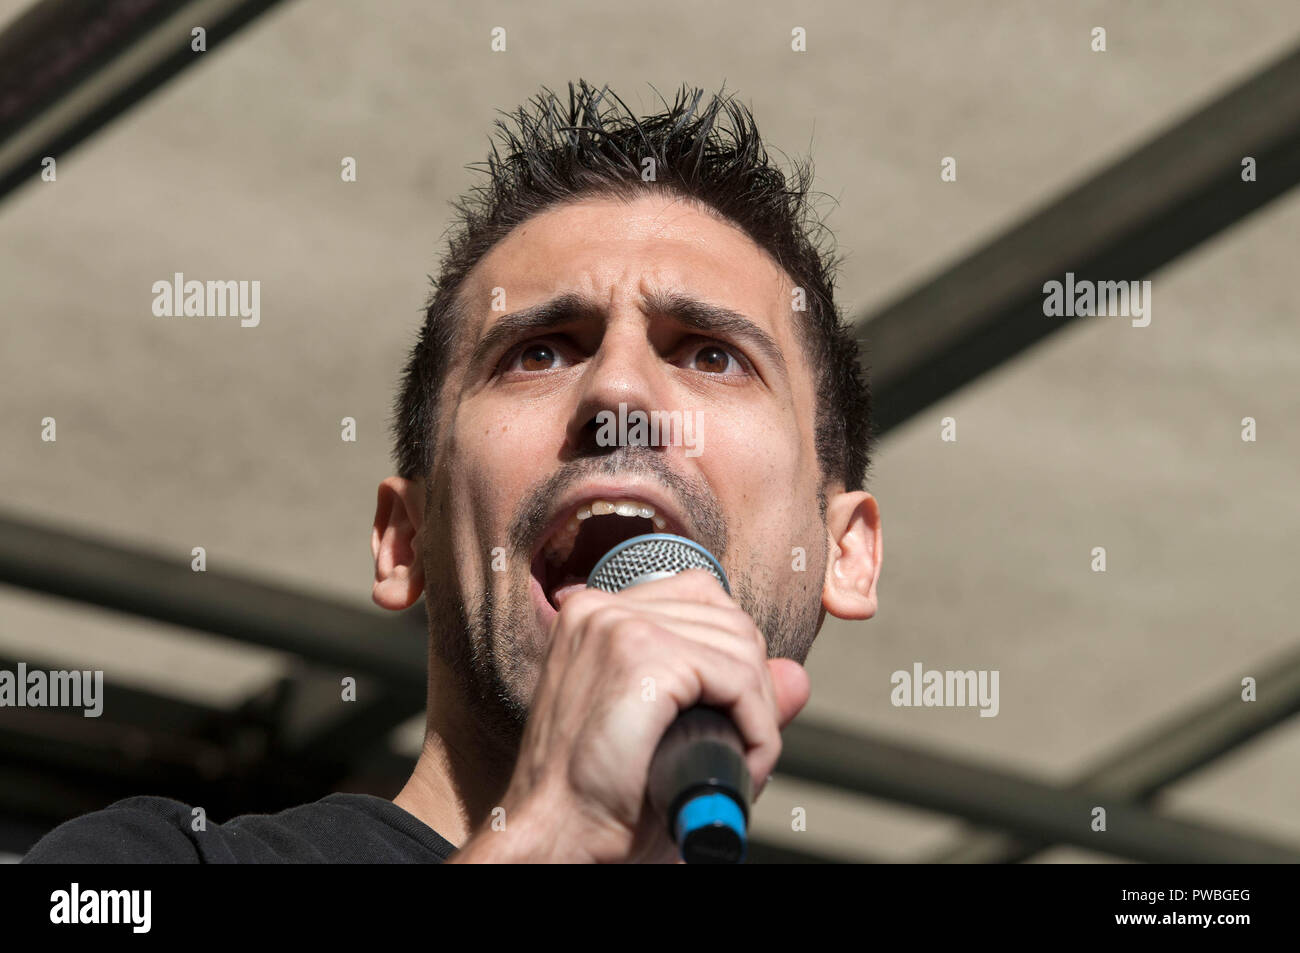 London, Greater London, UK. 13th Oct, 2018. Yannis Gourtsoyannis, Momentum NEC & leading junior activist in the BMA speaking at the antifascist demonstration against the DFLA in London.Counter demonstration organised by United Against Racism & Islamophobia, Trade Unions and Stand Up to Racism marched from Old Palace Yard to Whitehall in an attempt to block the route of Democratic Football Lads Alliance (DFLA) march in London. During the counter demonstration there were incidents where DFLA supporters attempted to get close to the anti-racist protesters, that were controlled by Stock Photo